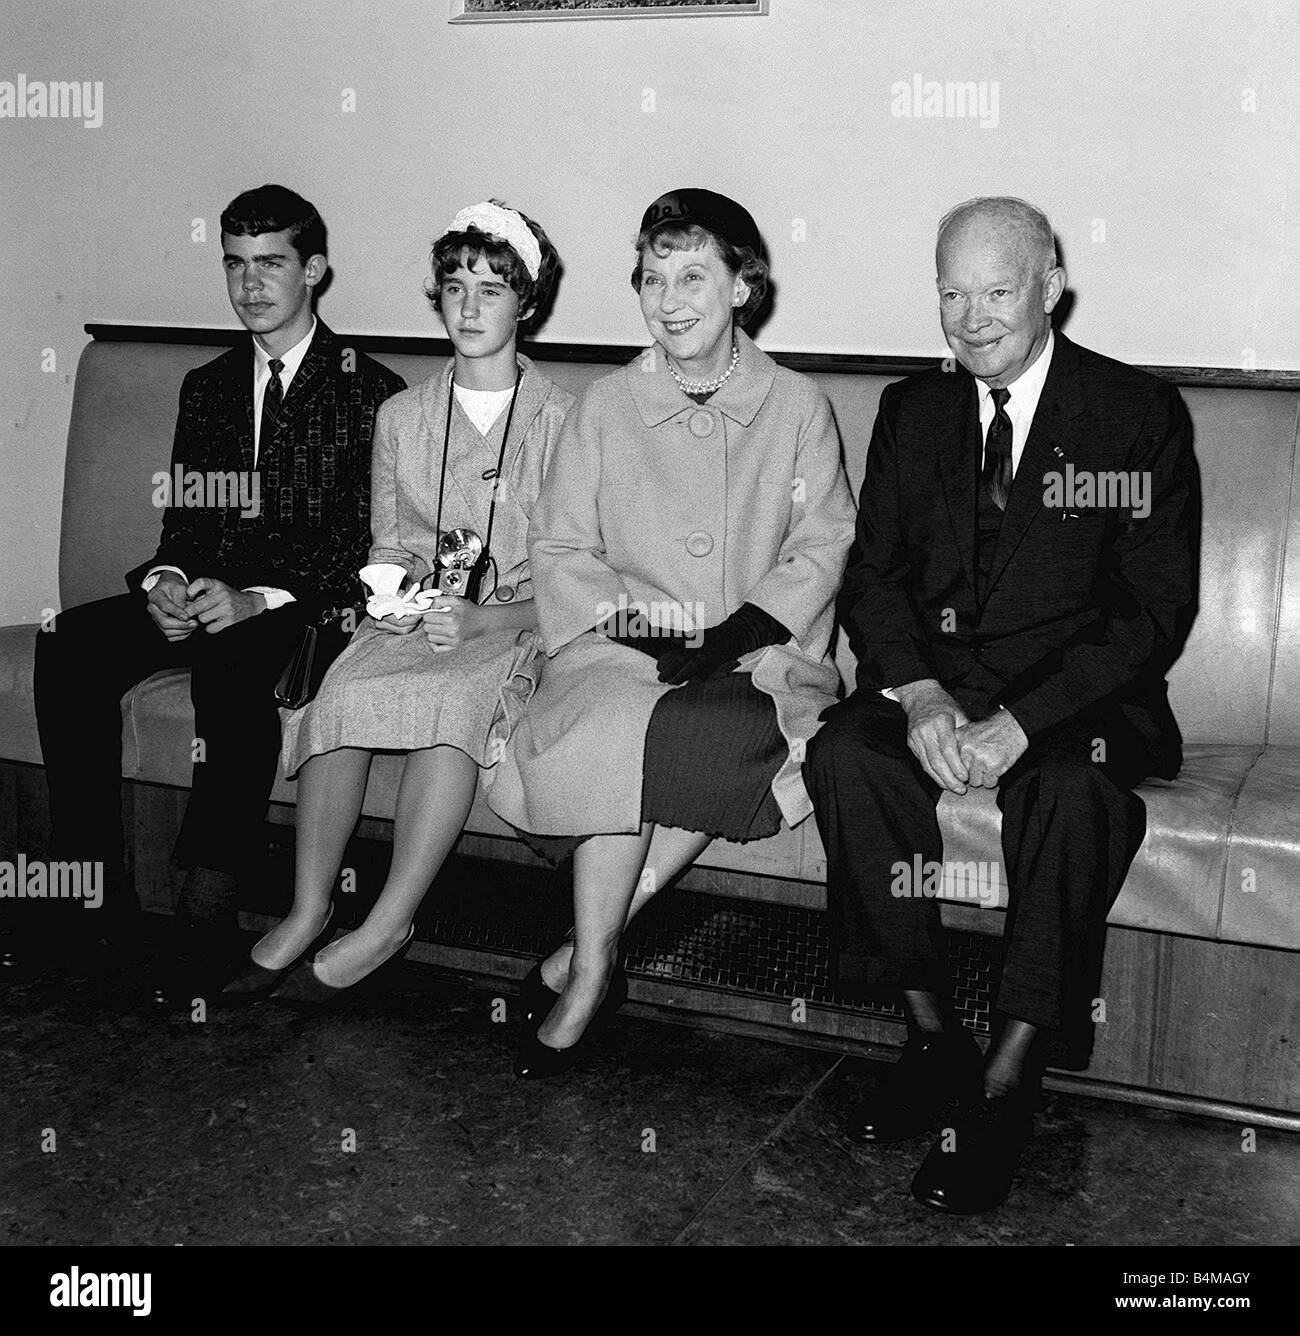 General Dwight Eisenhower arriving fromParis with his wife Mamie and two grandchildren Dwight David Eisenhower aged 14 and Barbara Anne Eisenhower aged 13 children of htheir son John Stock Photo